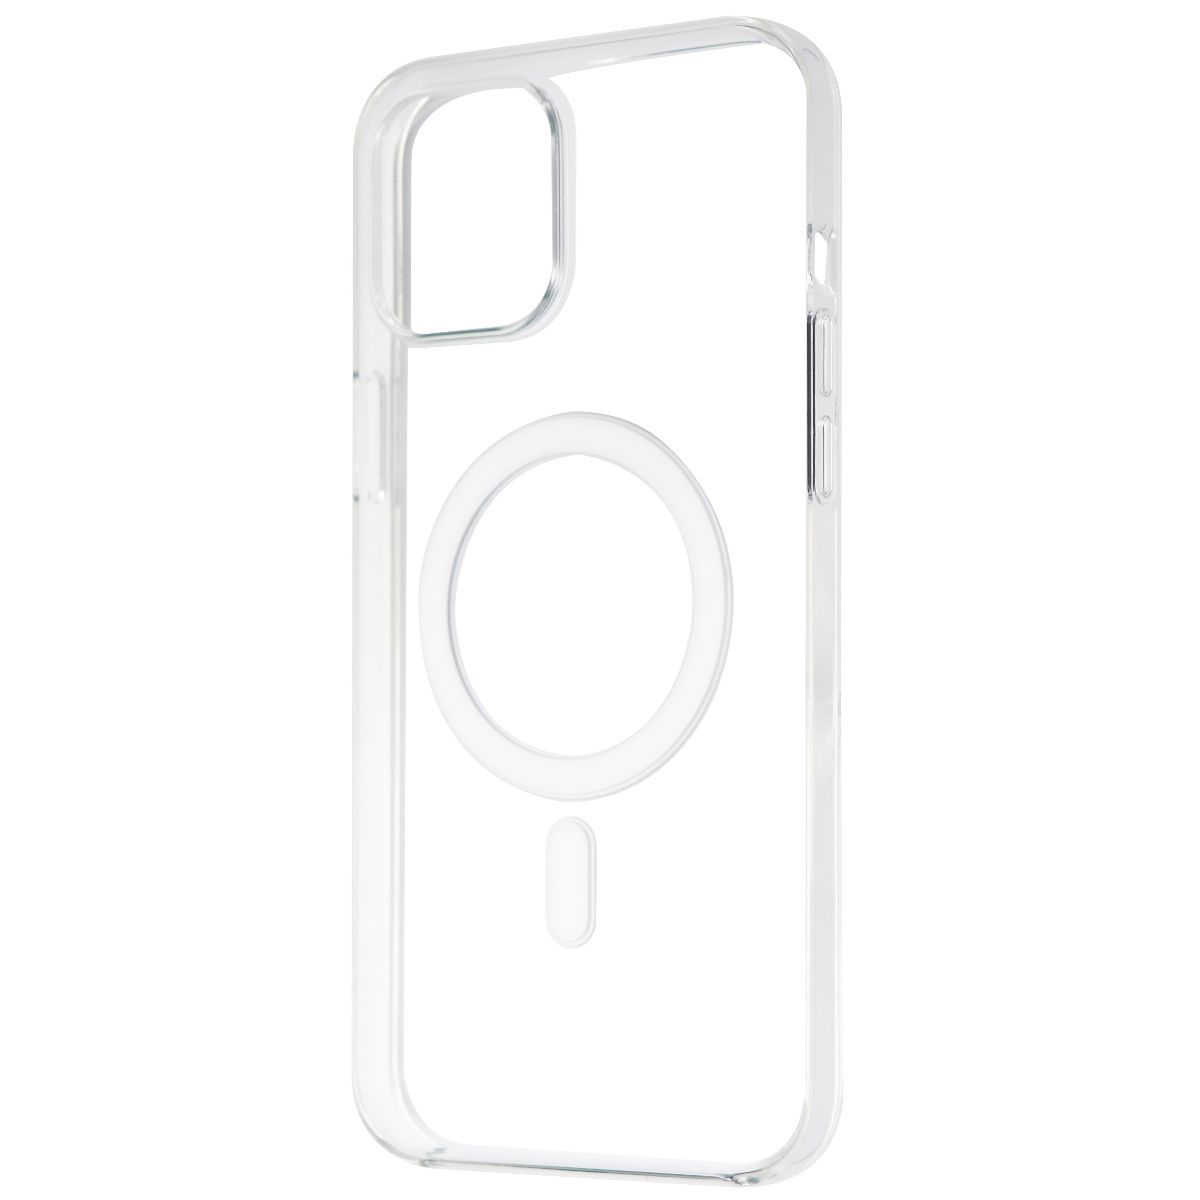 iPhone 12 Pro Max Clear Case with MagSafe - image 1 of 5